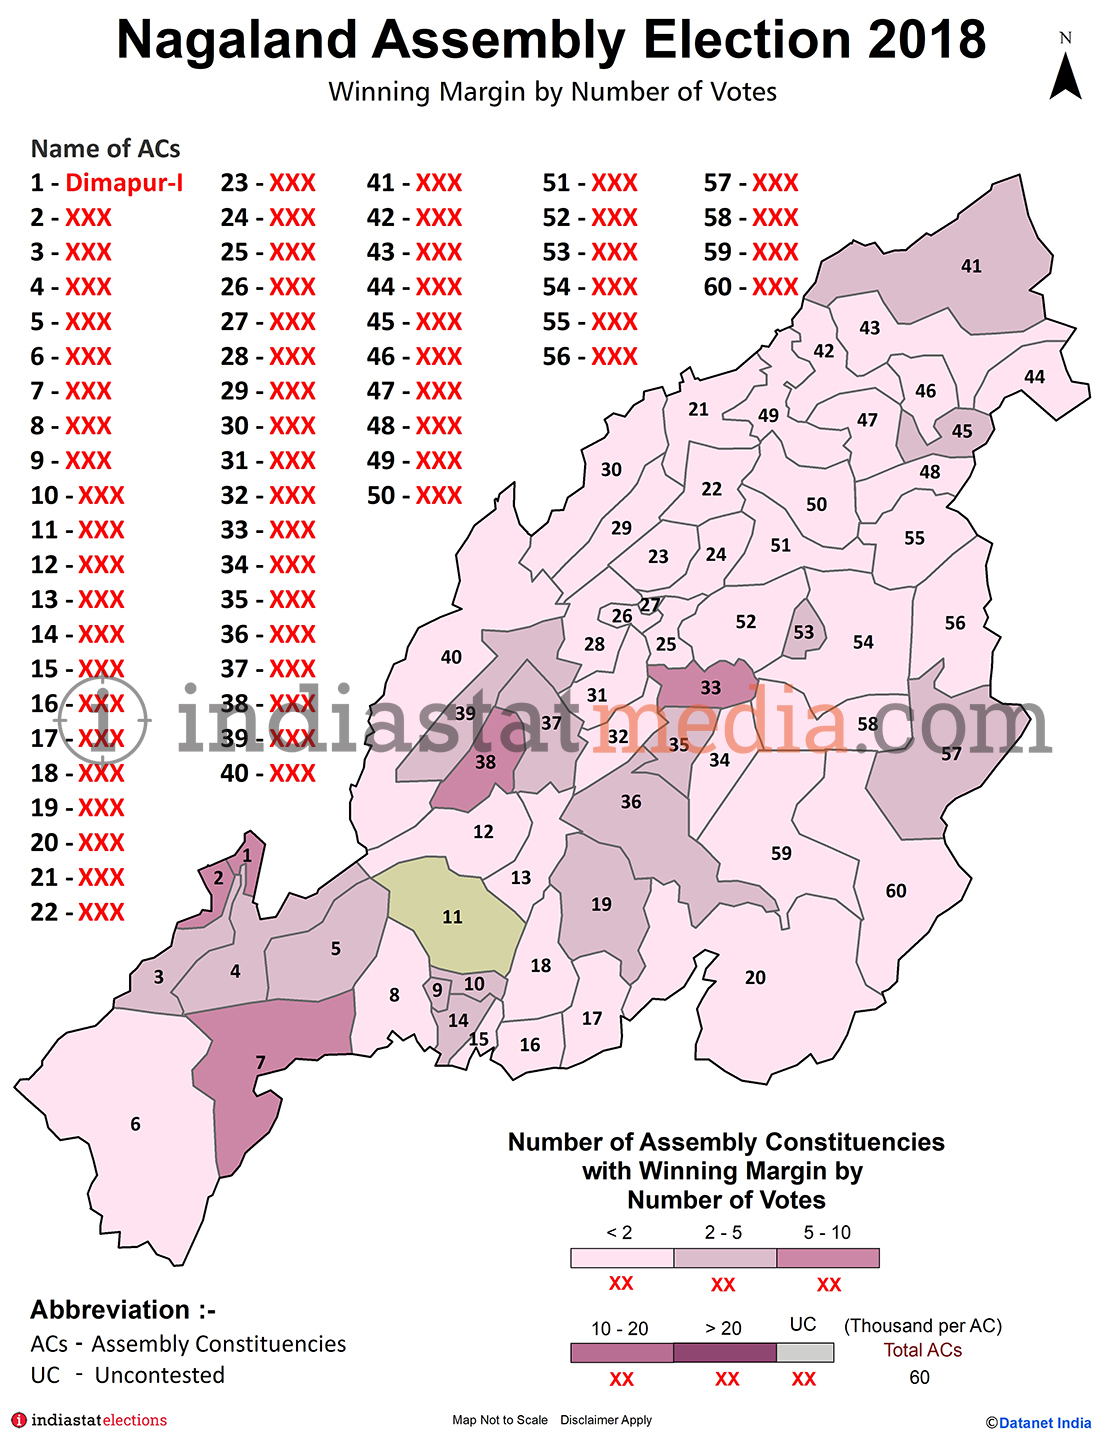 Winning Margin by Number of Votes in Nagaland (Assembly Election - 2018)